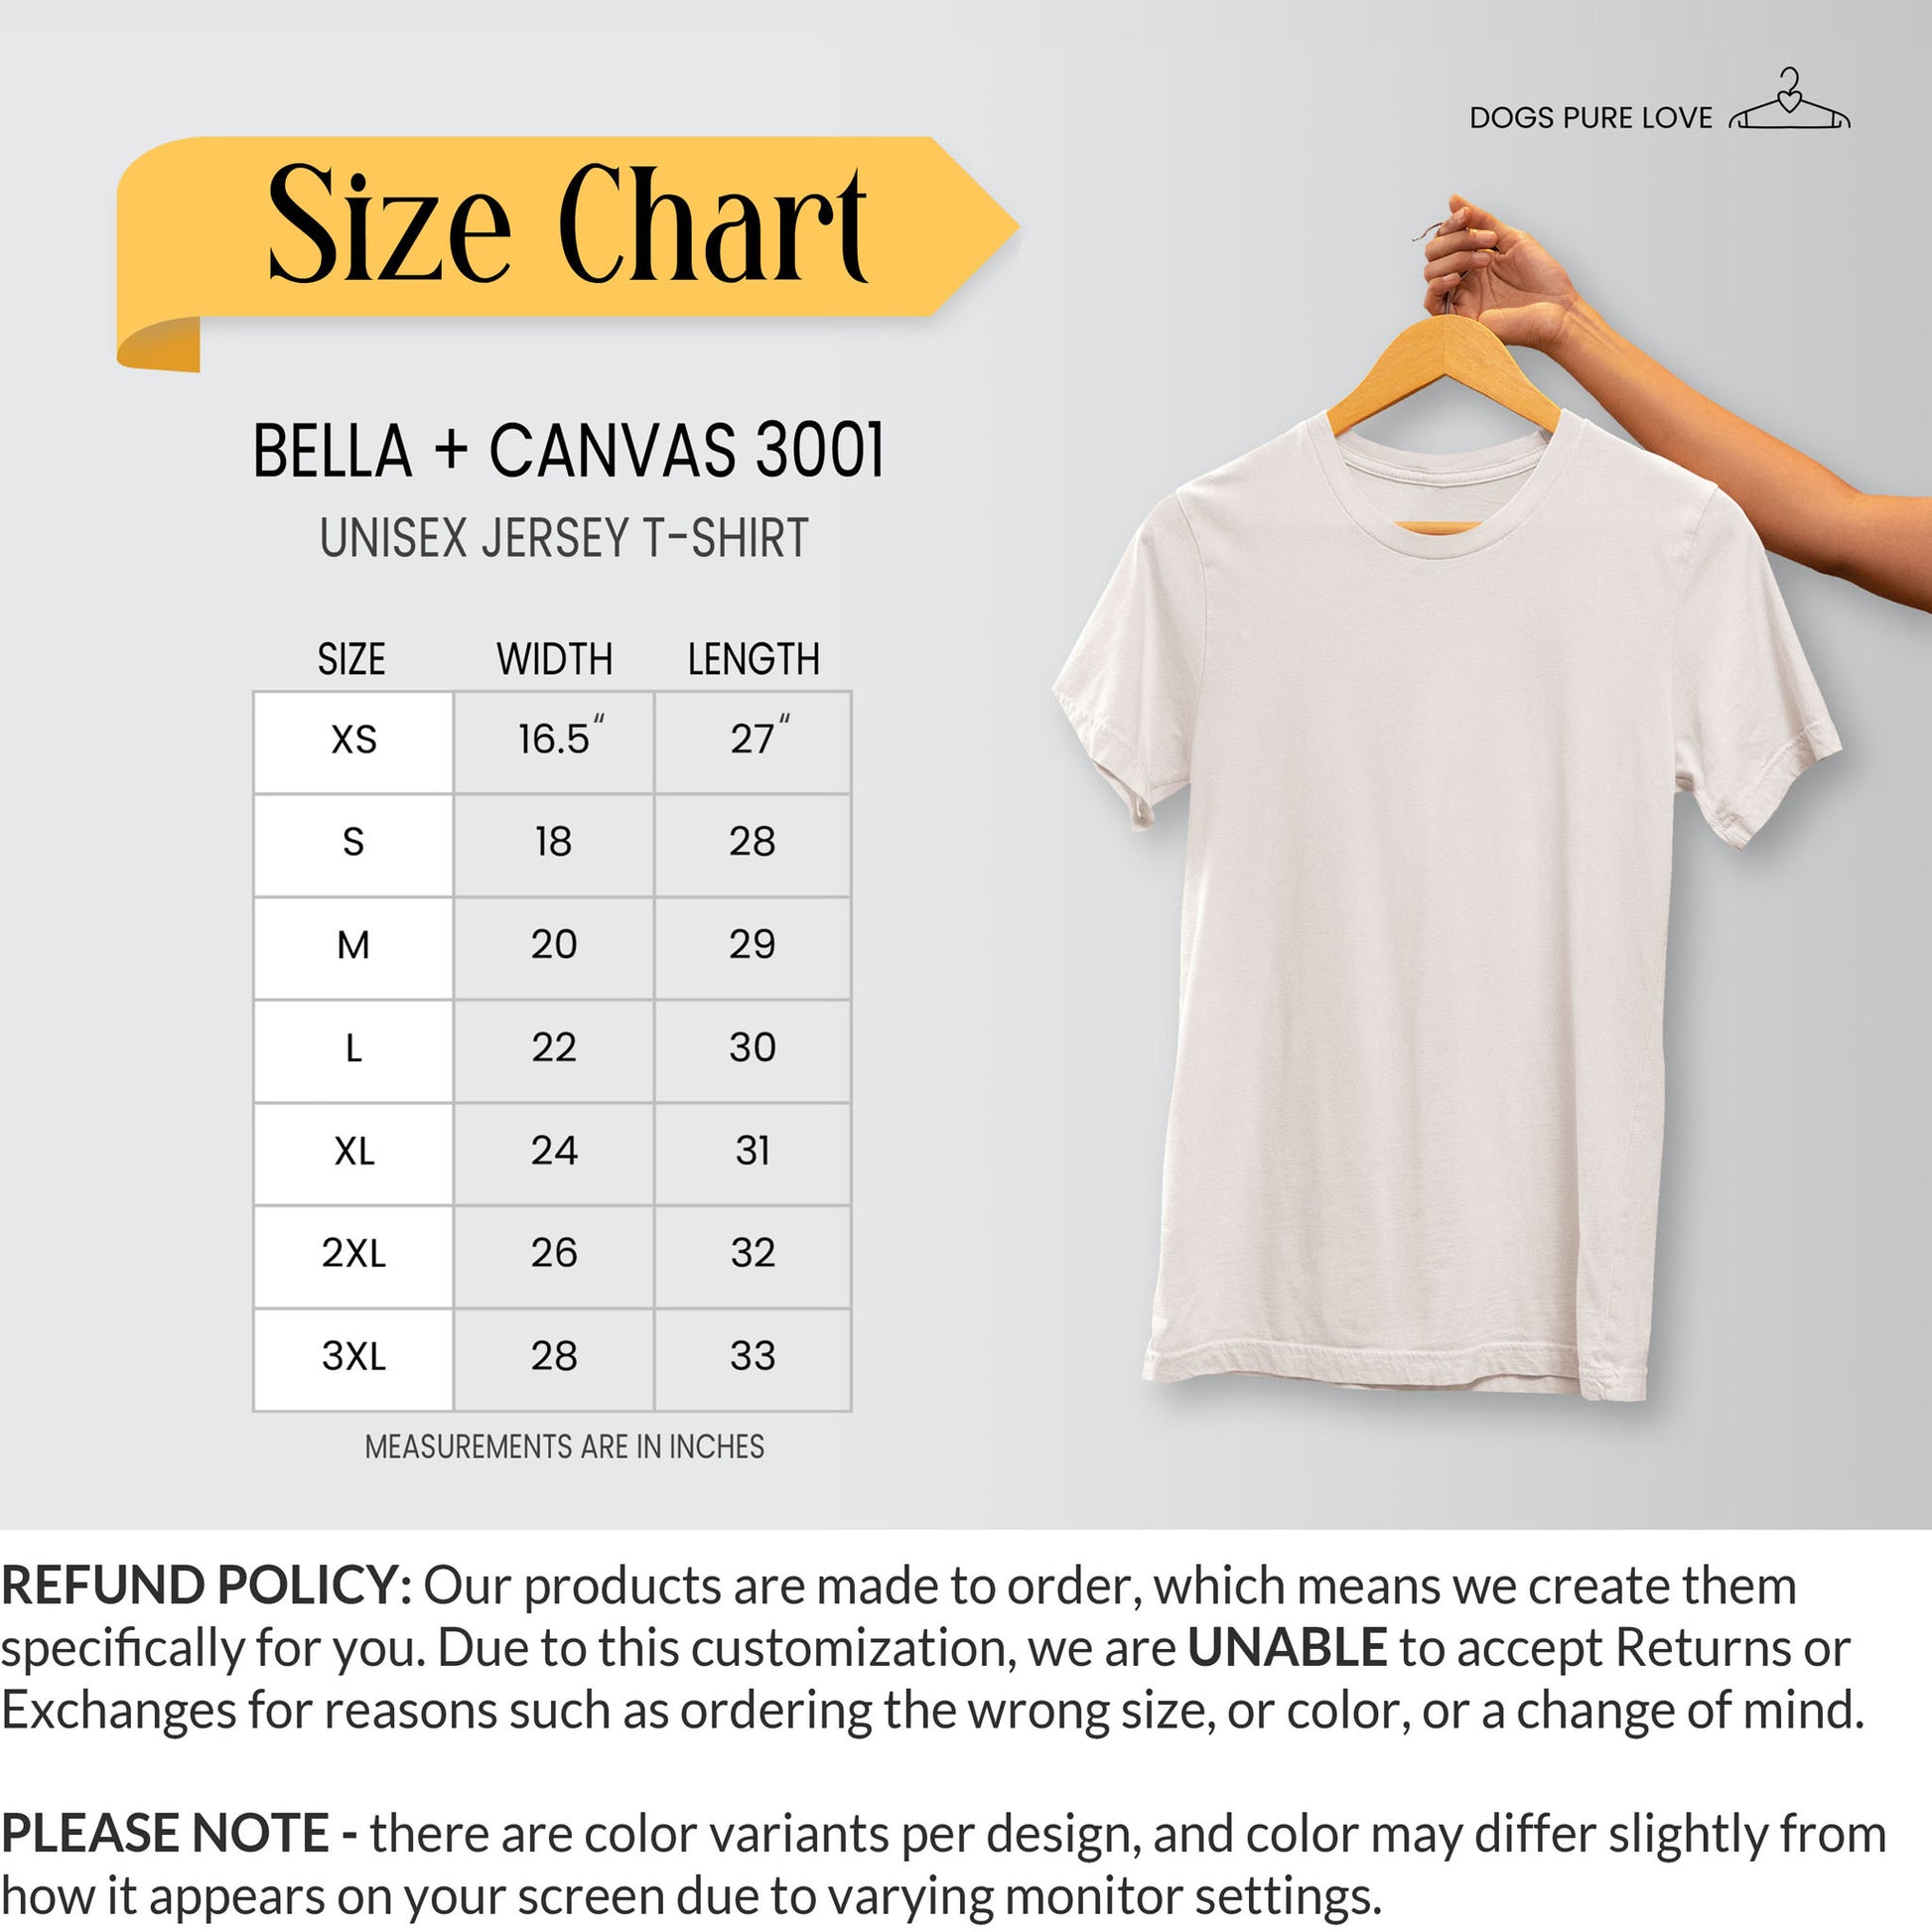 A T-Shirt Size Chart by Dogs Pure Love displays a variety of measurements and a small Refund Policy description.